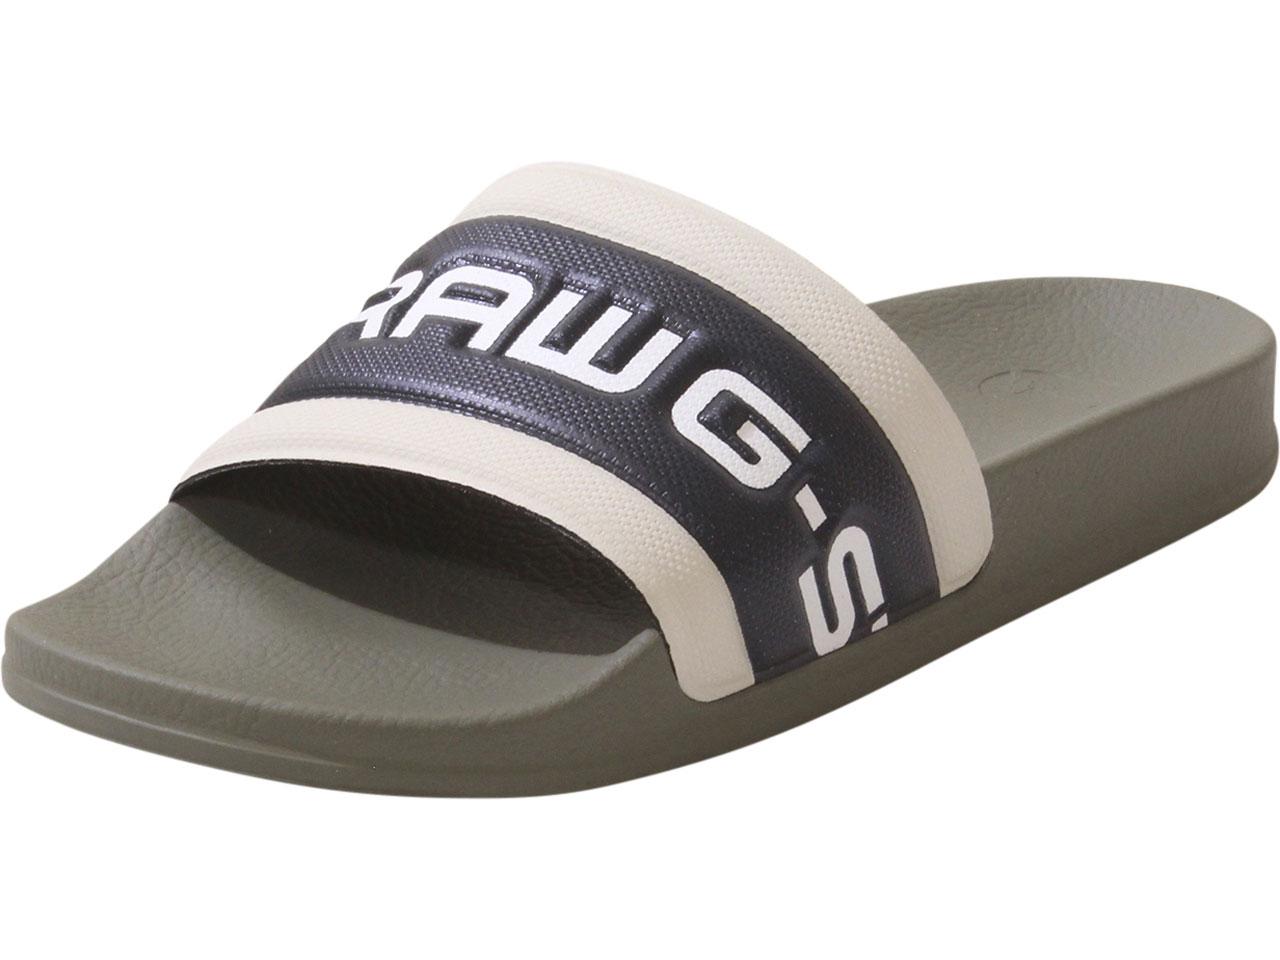 G NXT THONG FLIP FLOP AND SLIPPER FOR MEN COLOR RUST